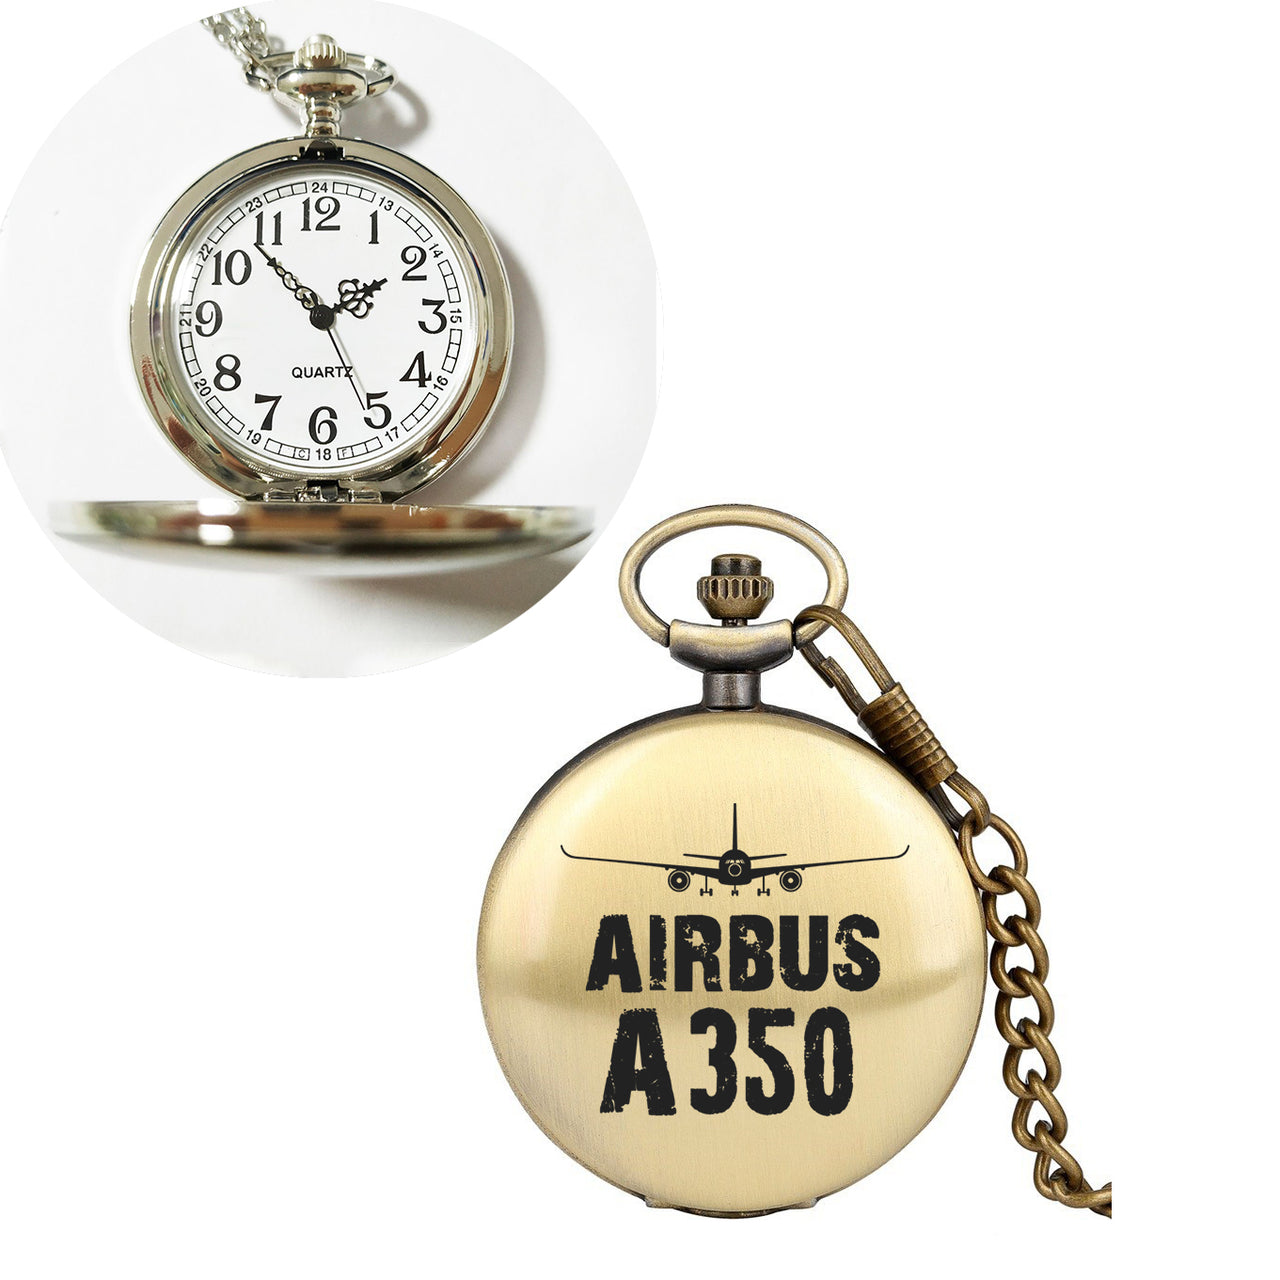 Airbus A350 & Plane Designed Pocket Watches